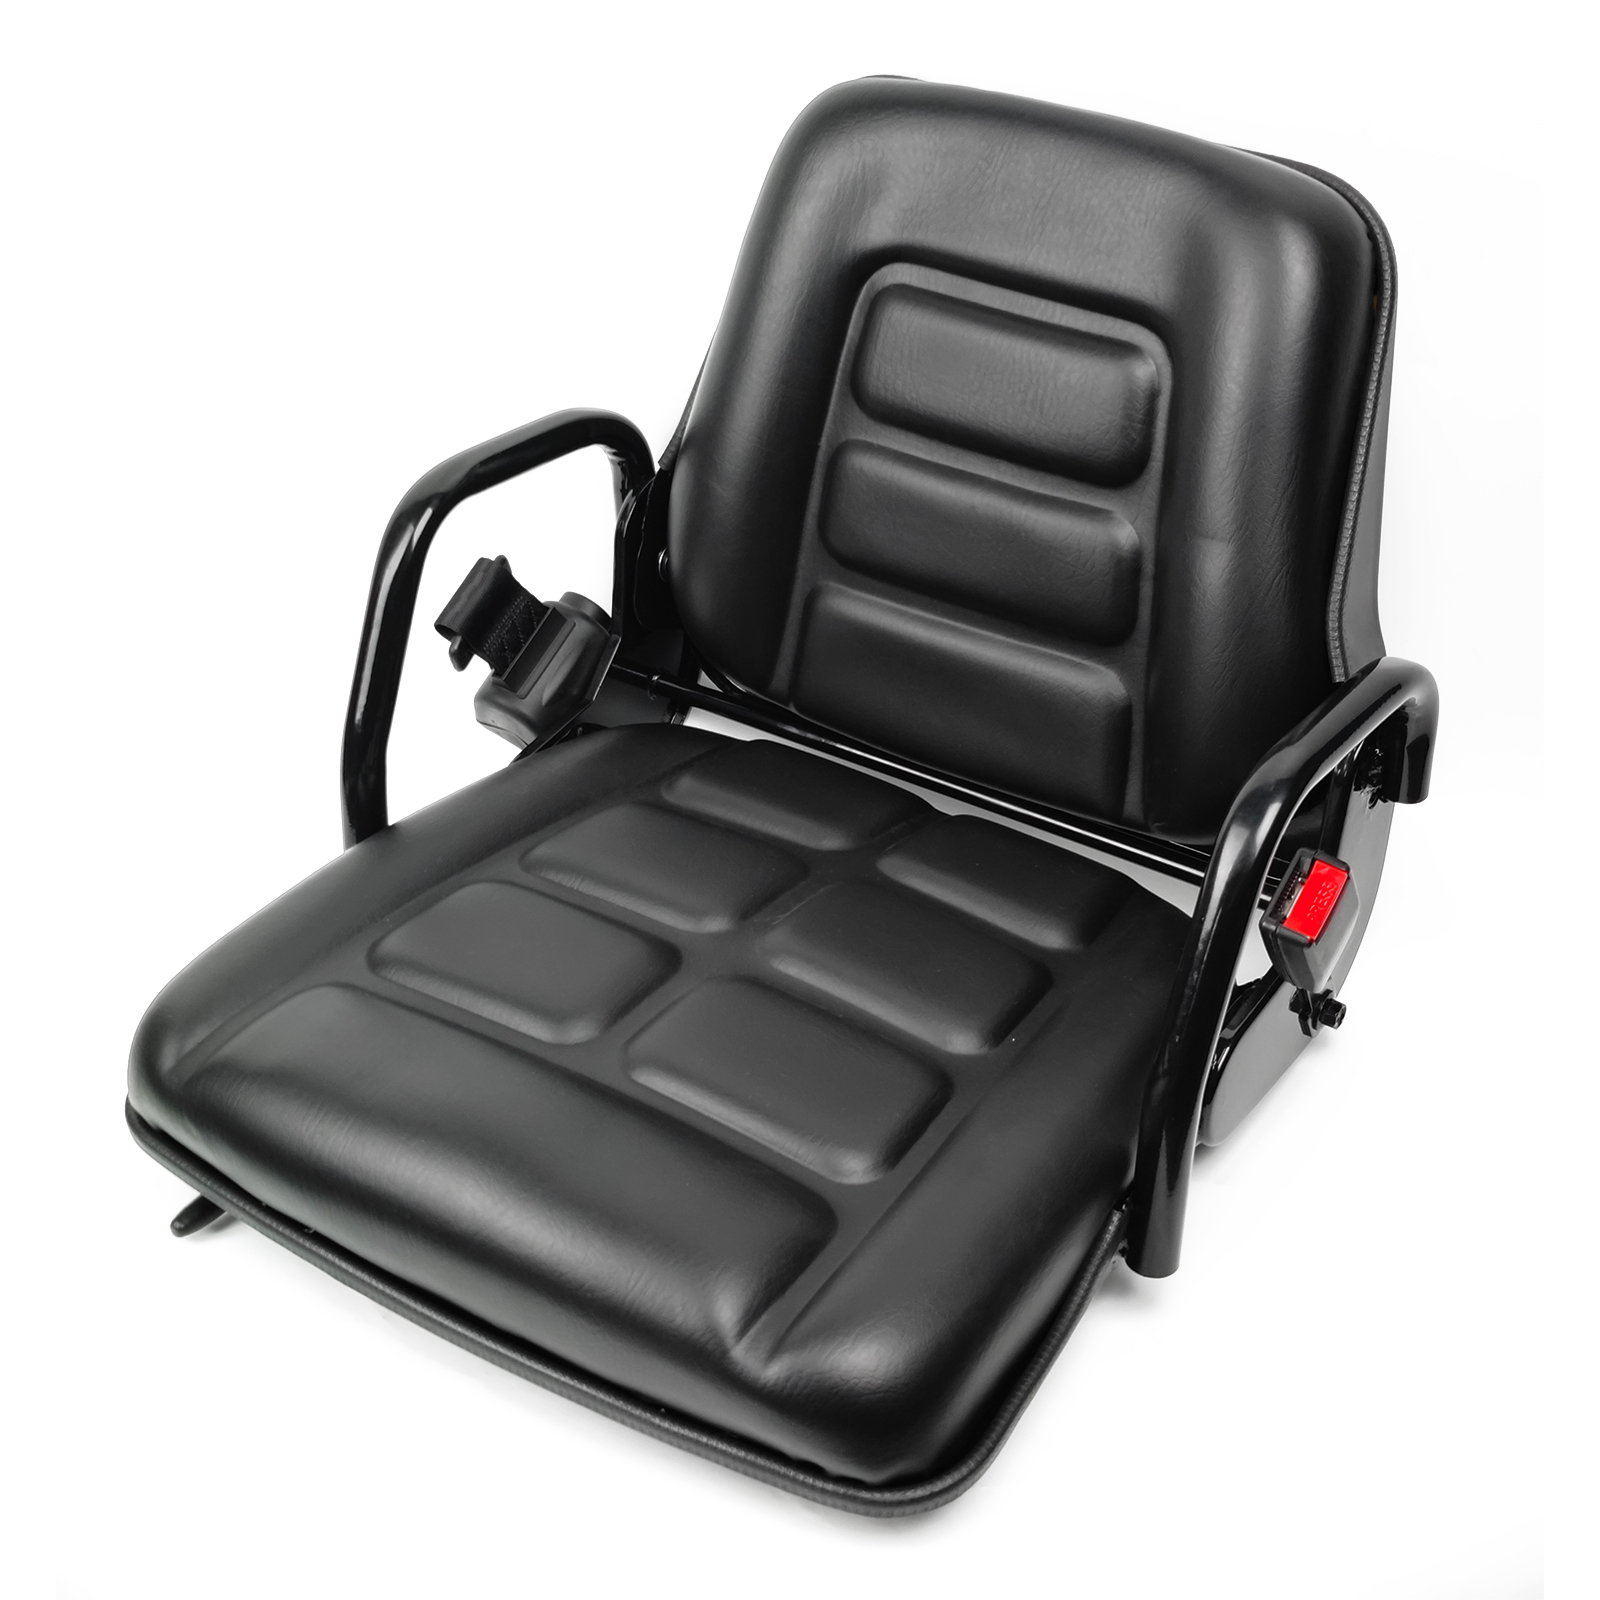 Hot Selling for Air Ride Seat Base - Forklift Seat with Integrated Steel Armrest Fold Down Backrest Fits Caterpillar Mitsubishi Doosan forklifts – Qinglin Seat